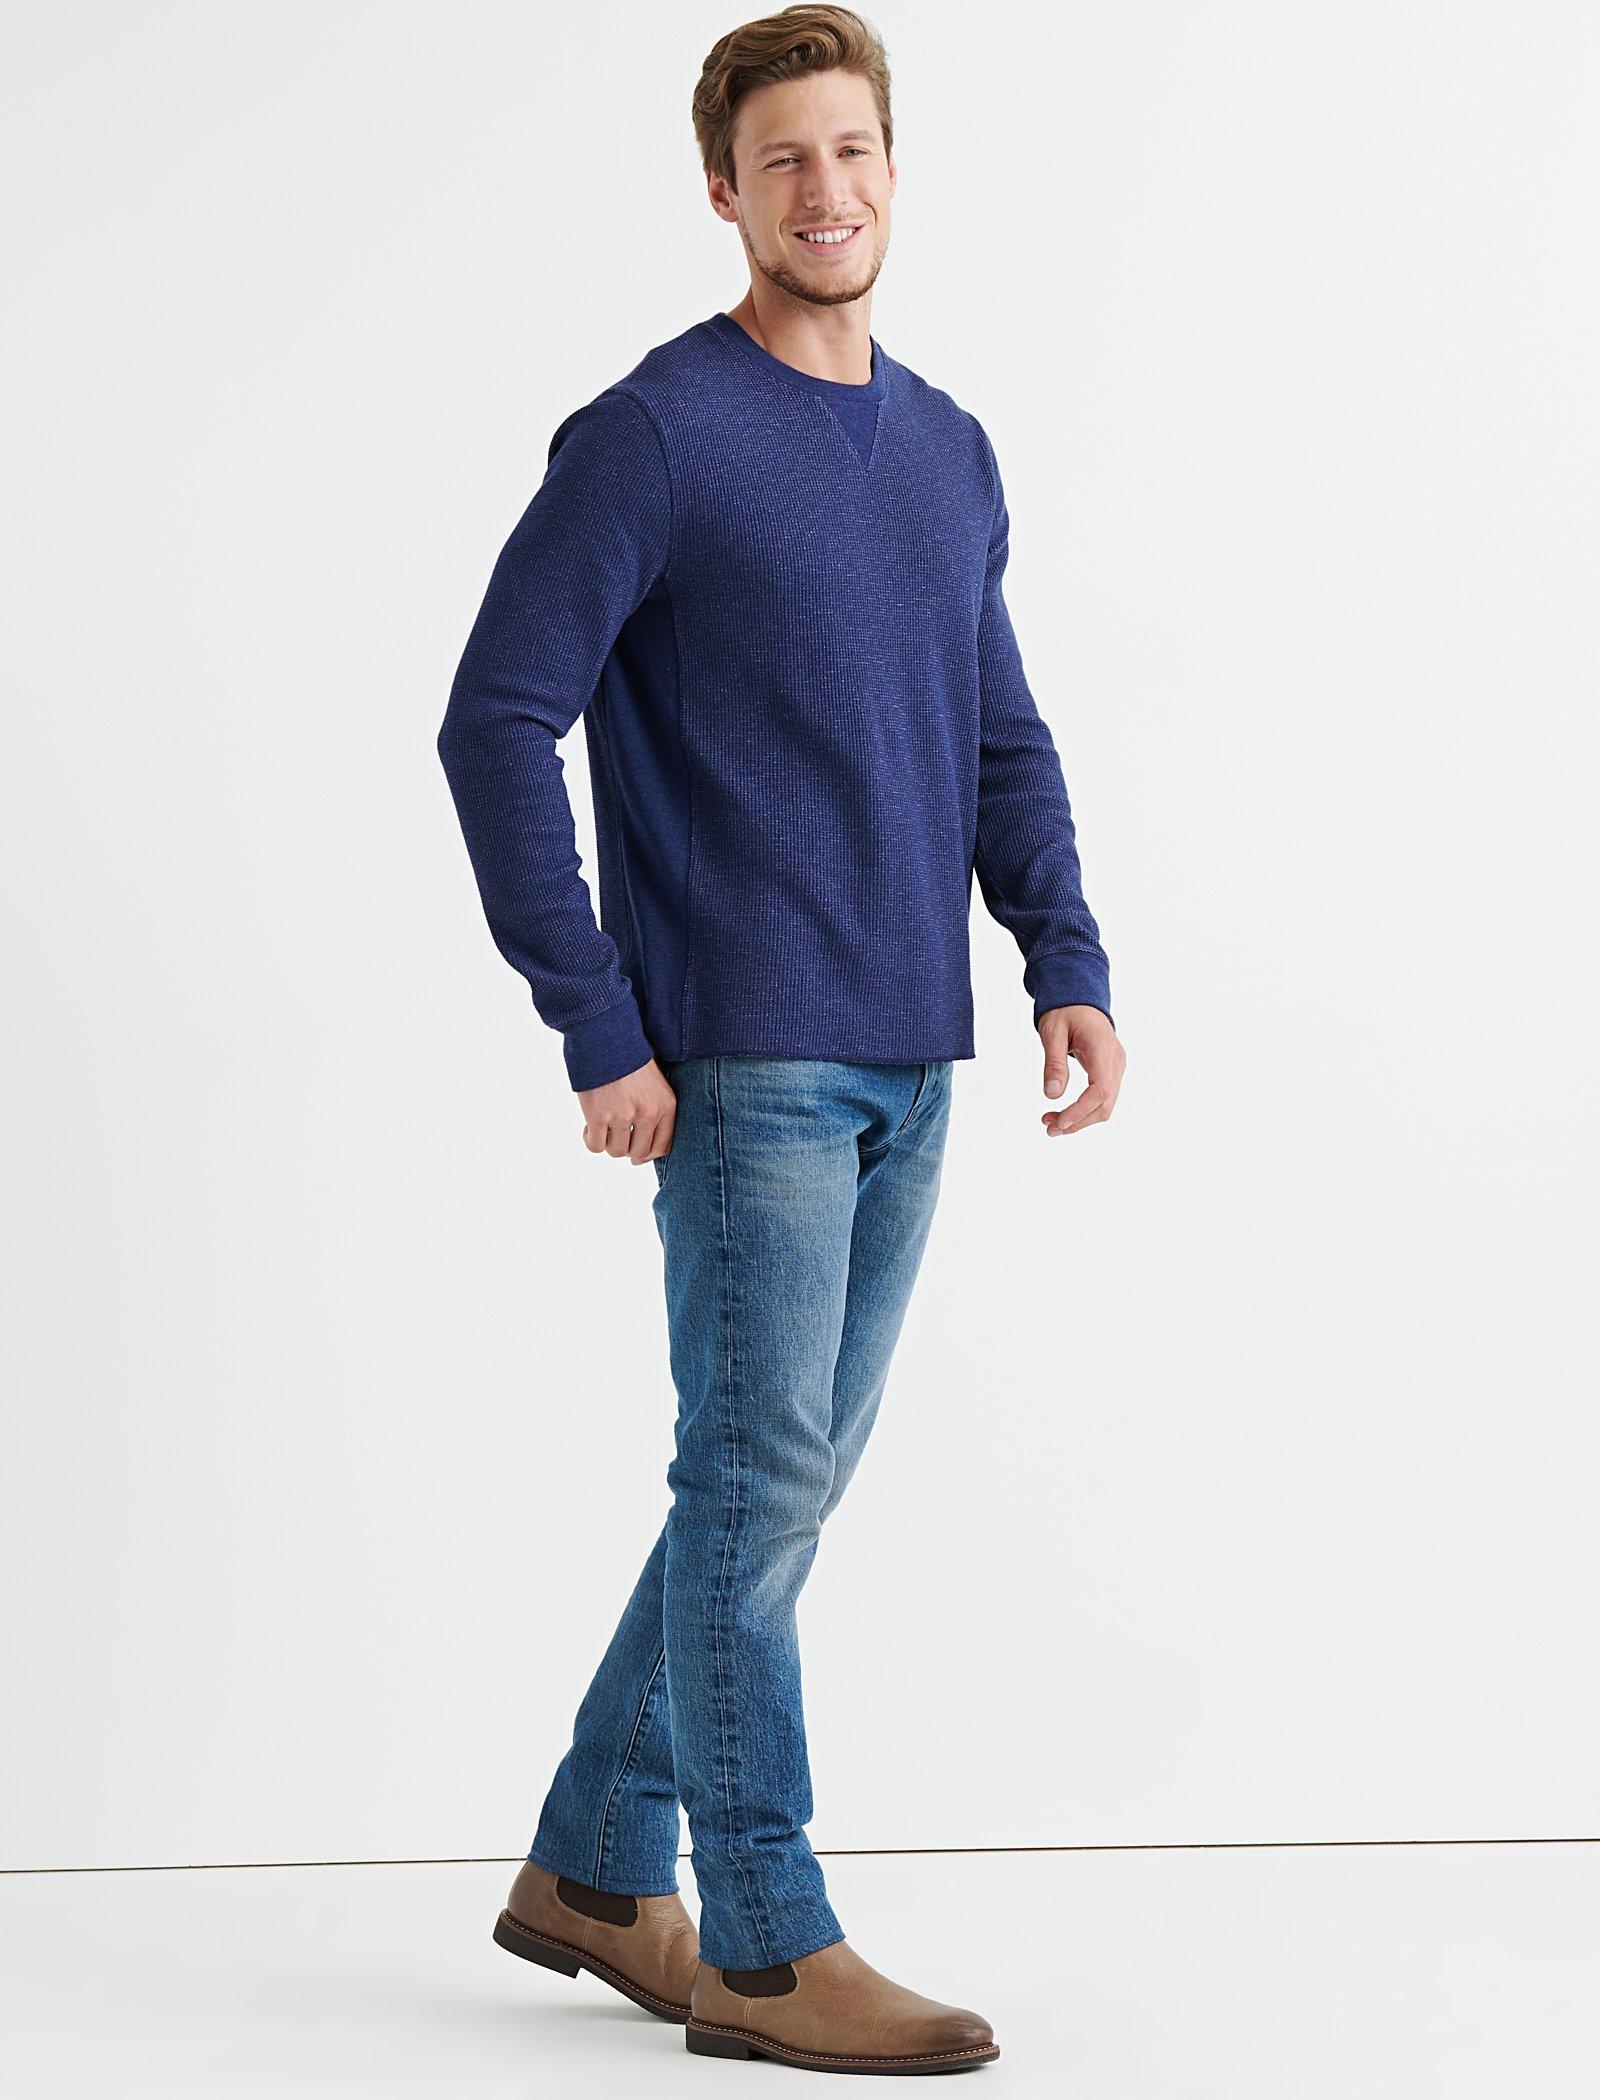 STRONG BOY FLECK THERMAL CREW | Lucky Brand